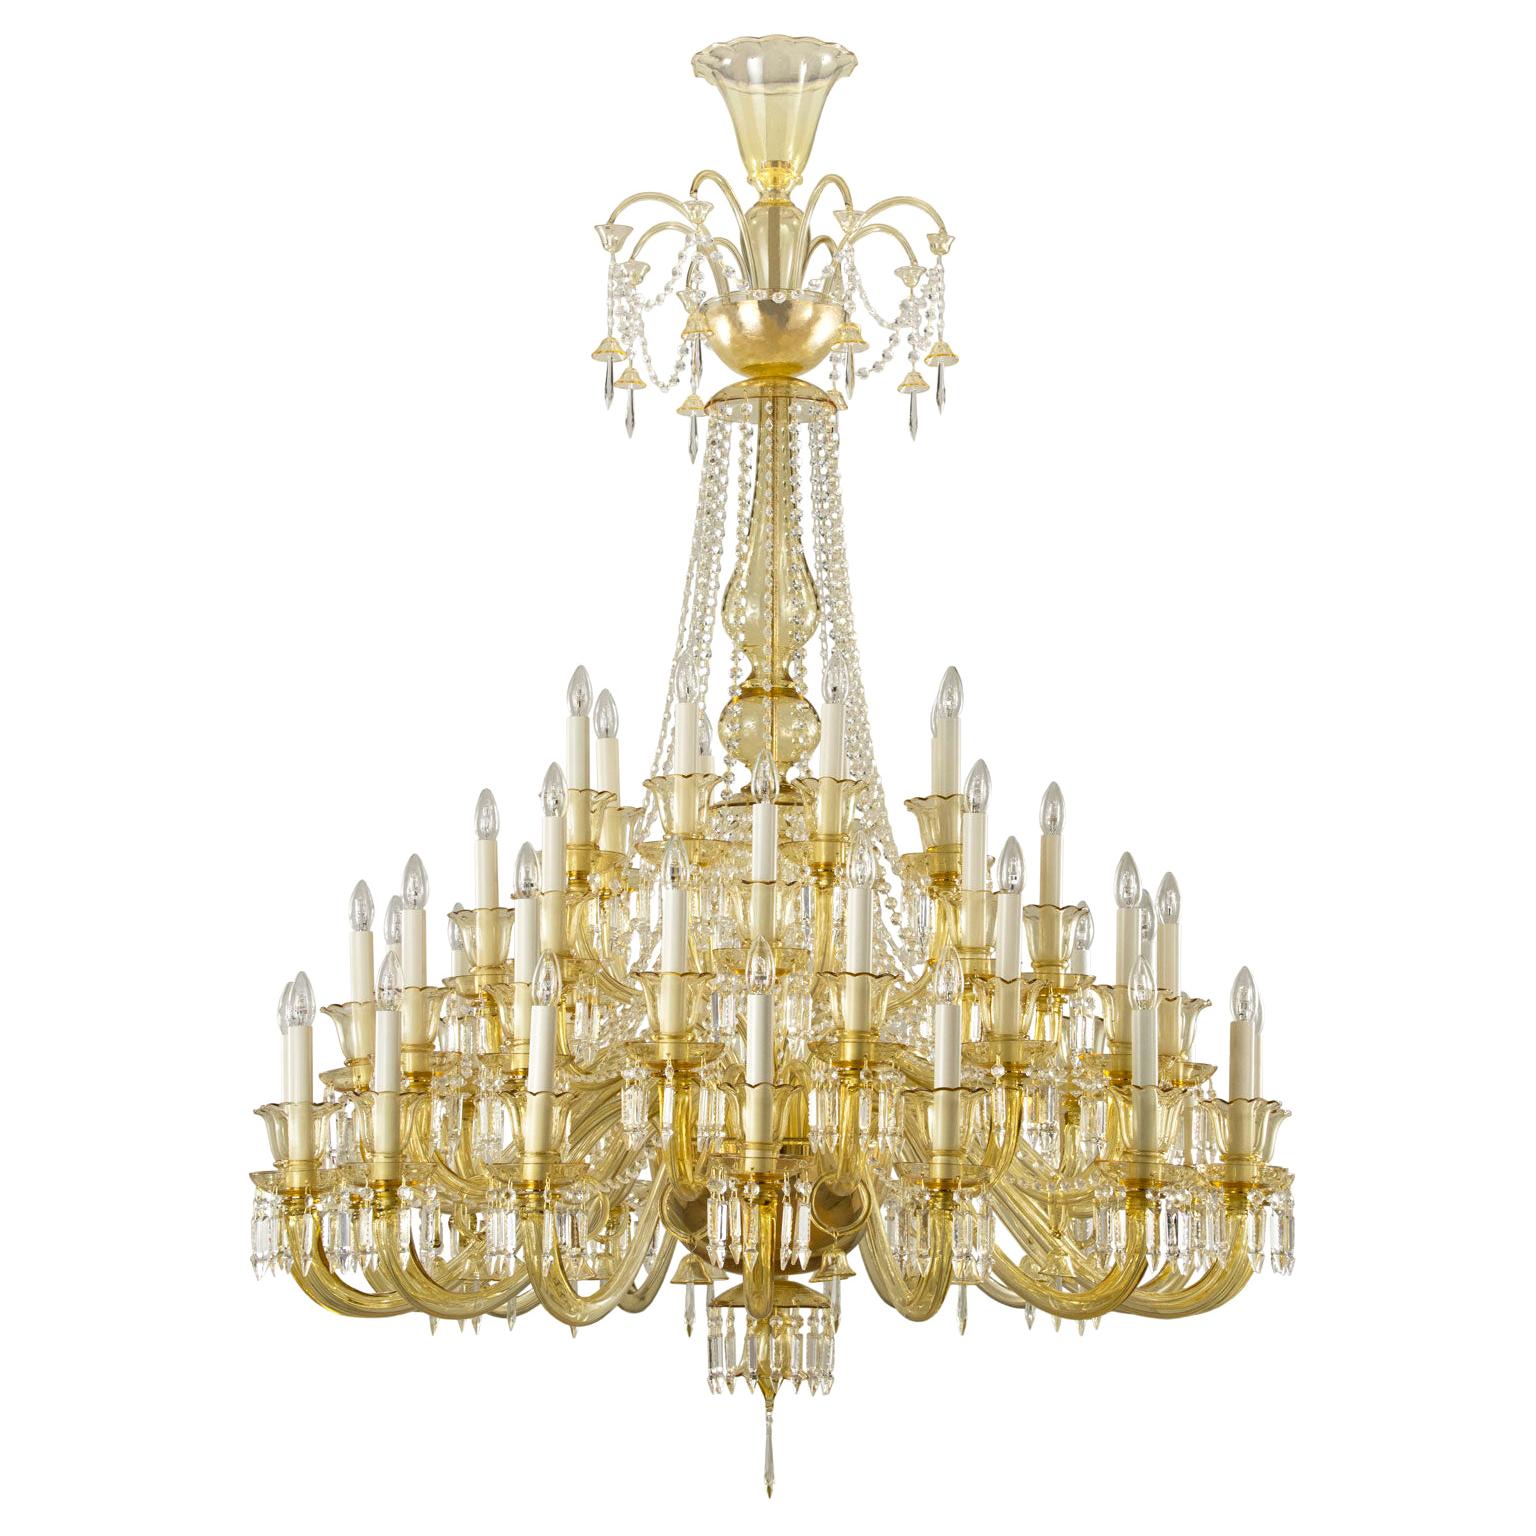 What is chandelier light?